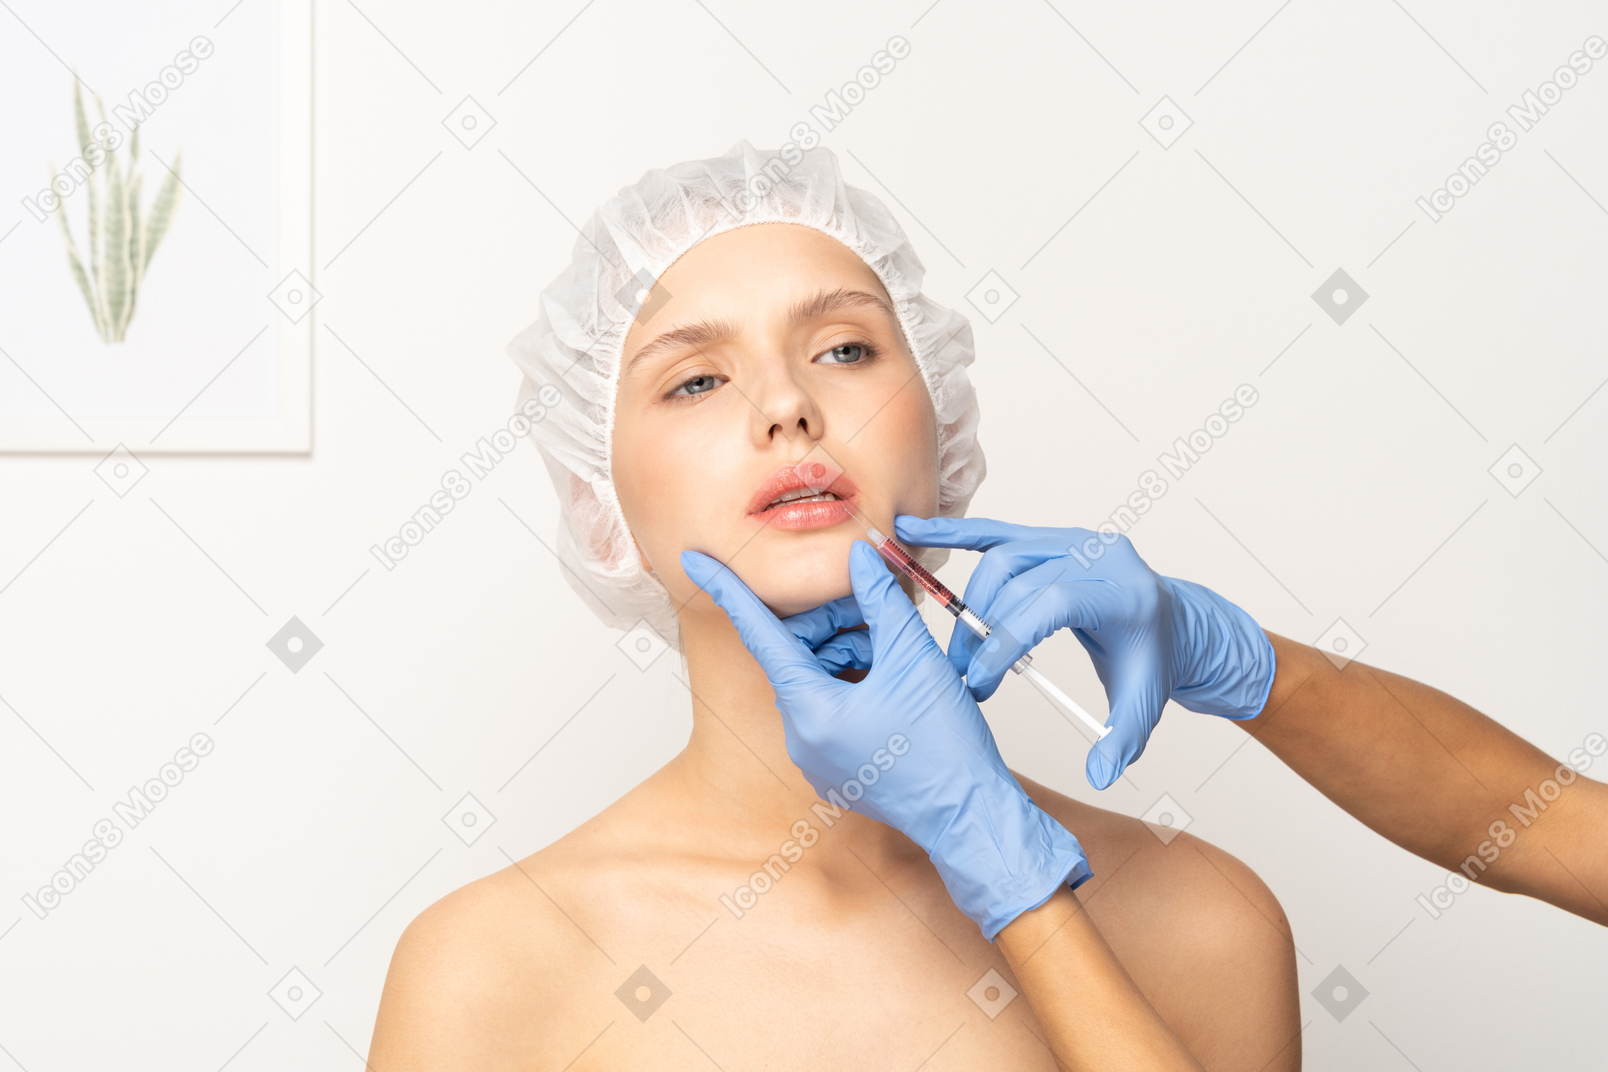 Woman looking upset while getting filler injection